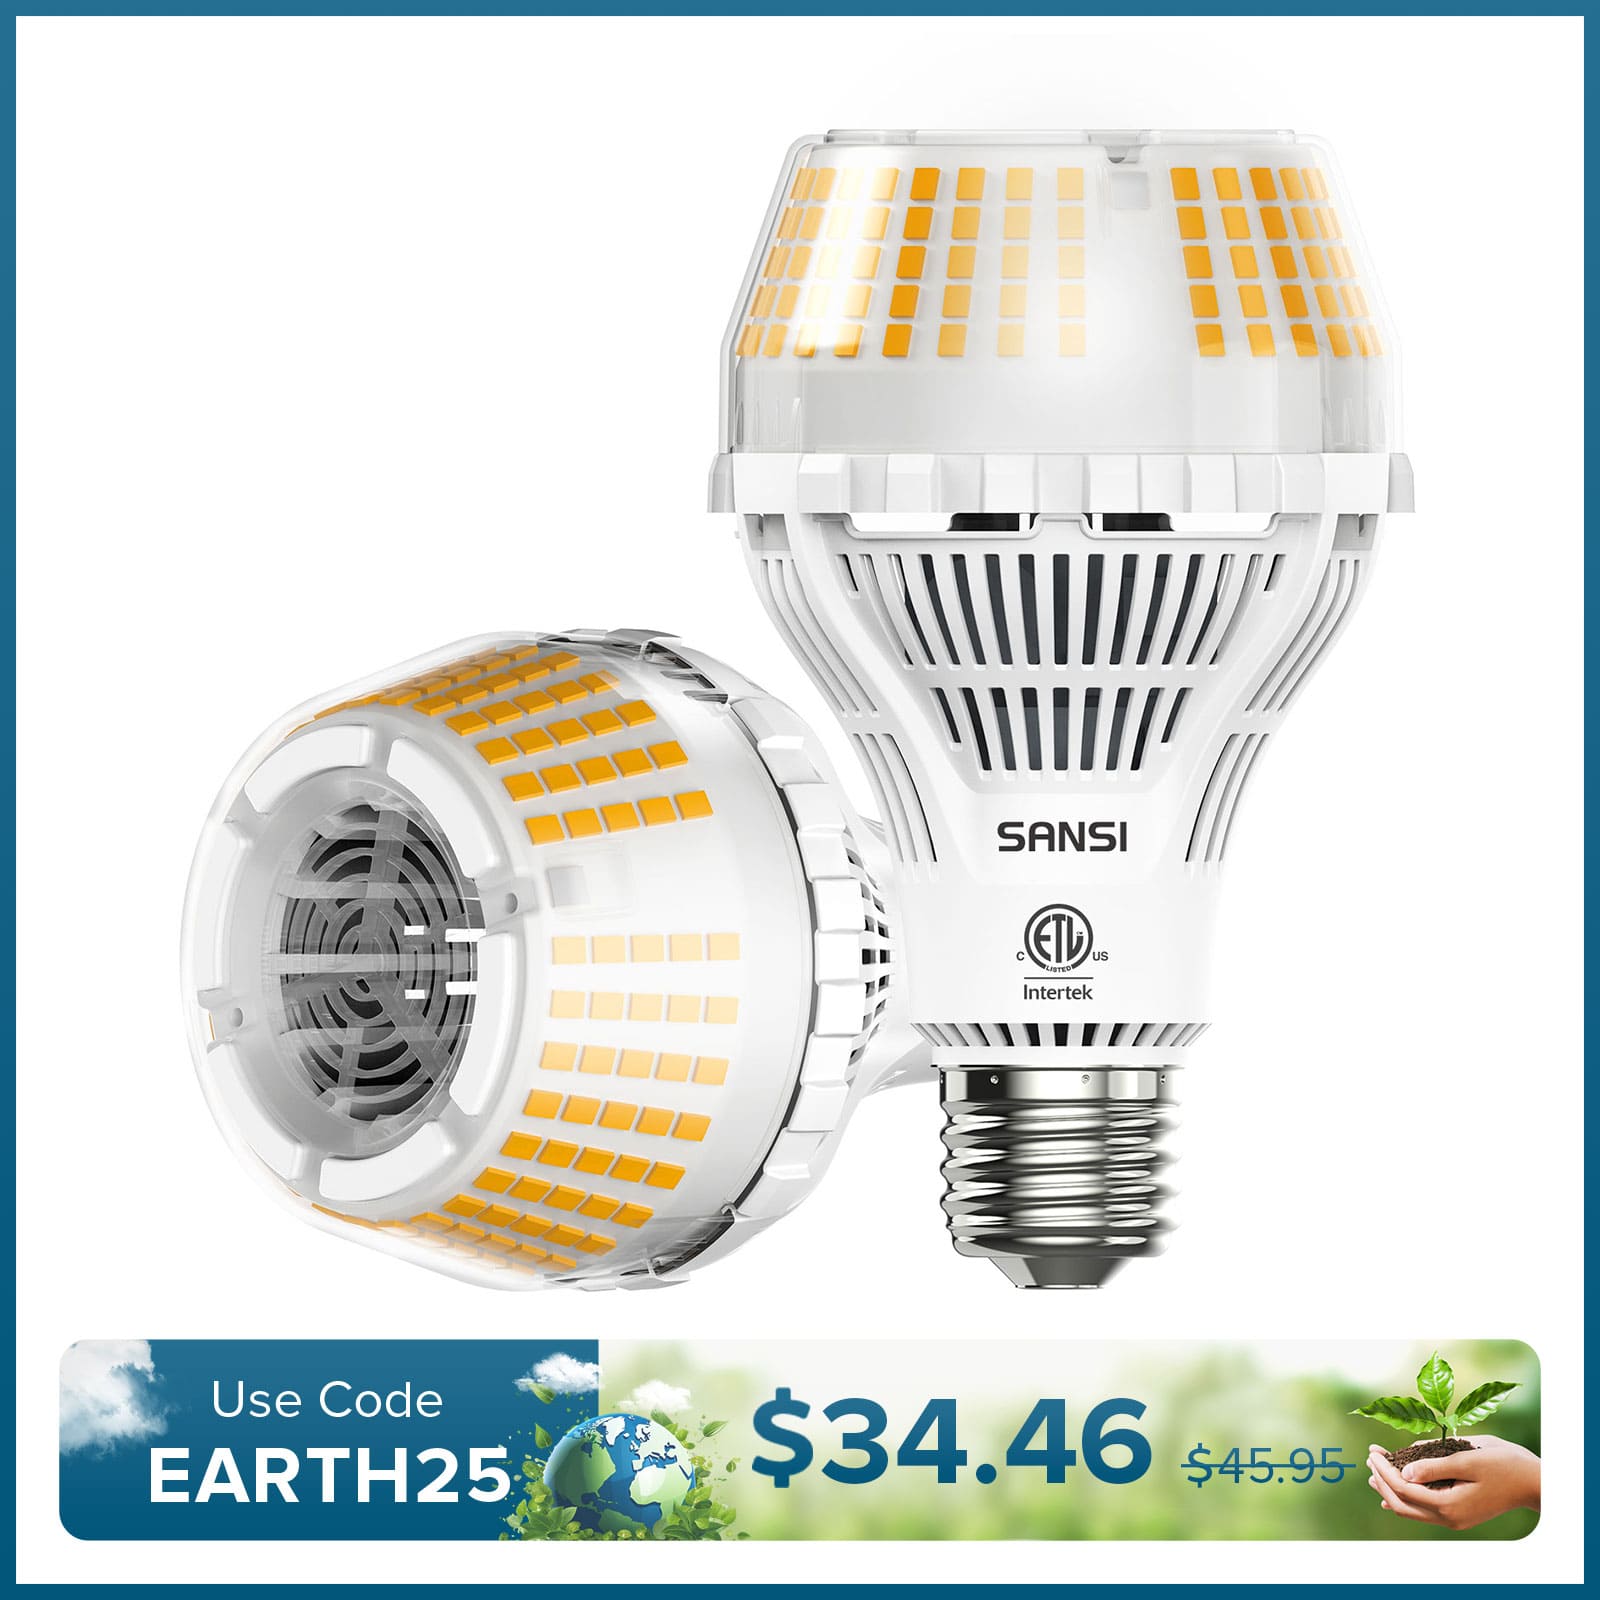 Upgraded (Non-)Dimmable A21 27W LED 3000K/5000K Light Bulb(US ONLY)